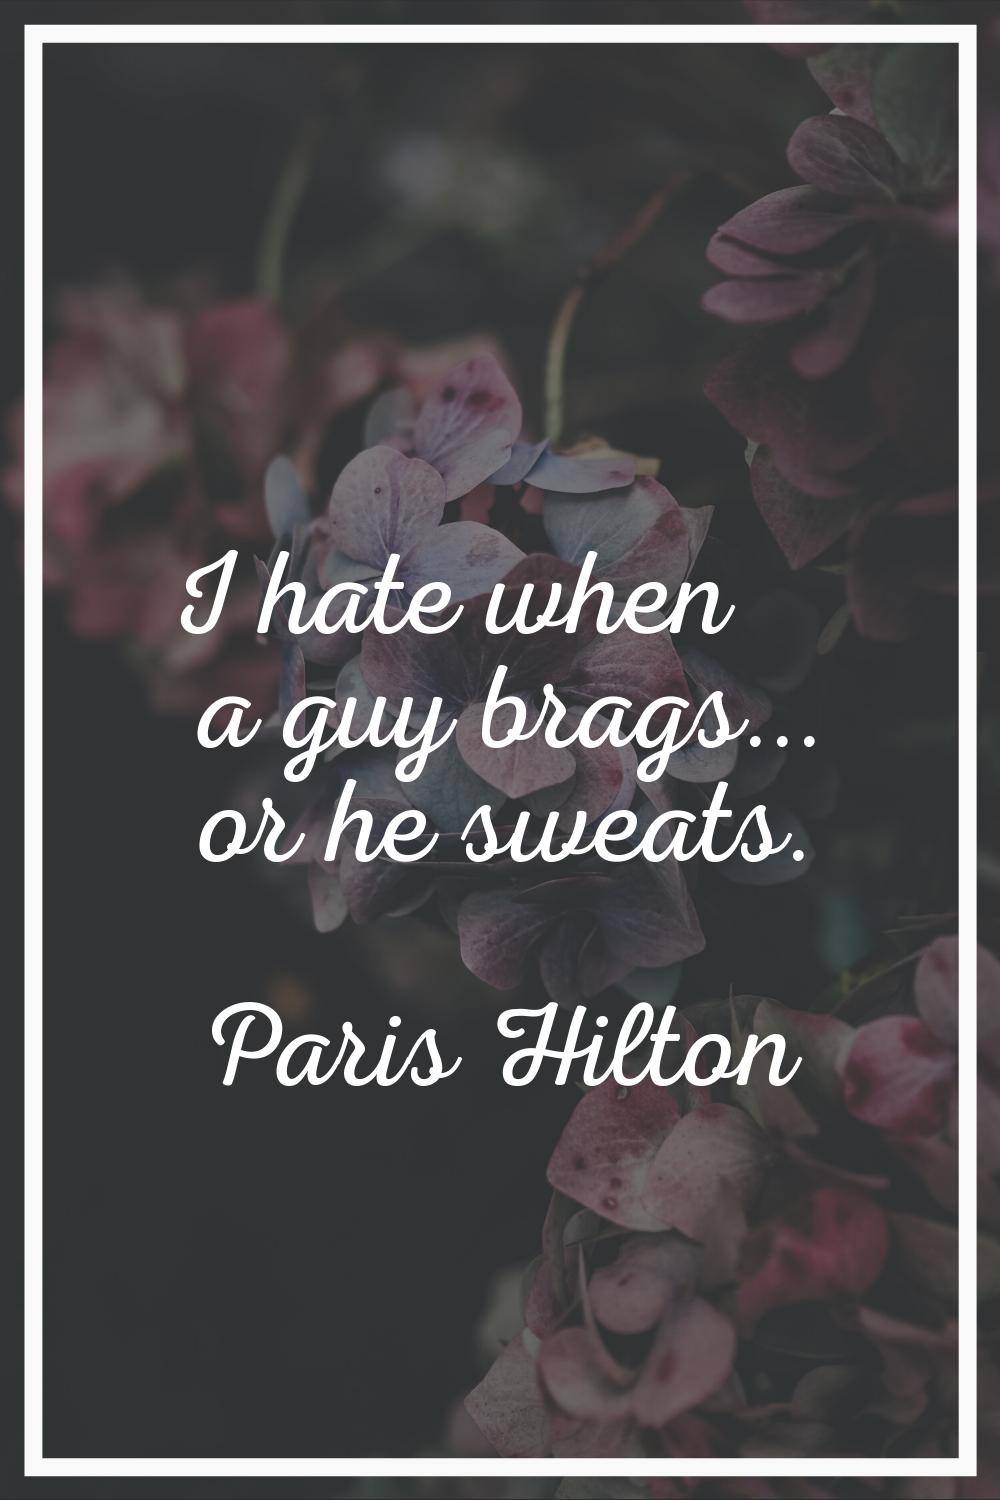 I hate when a guy brags... or he sweats.